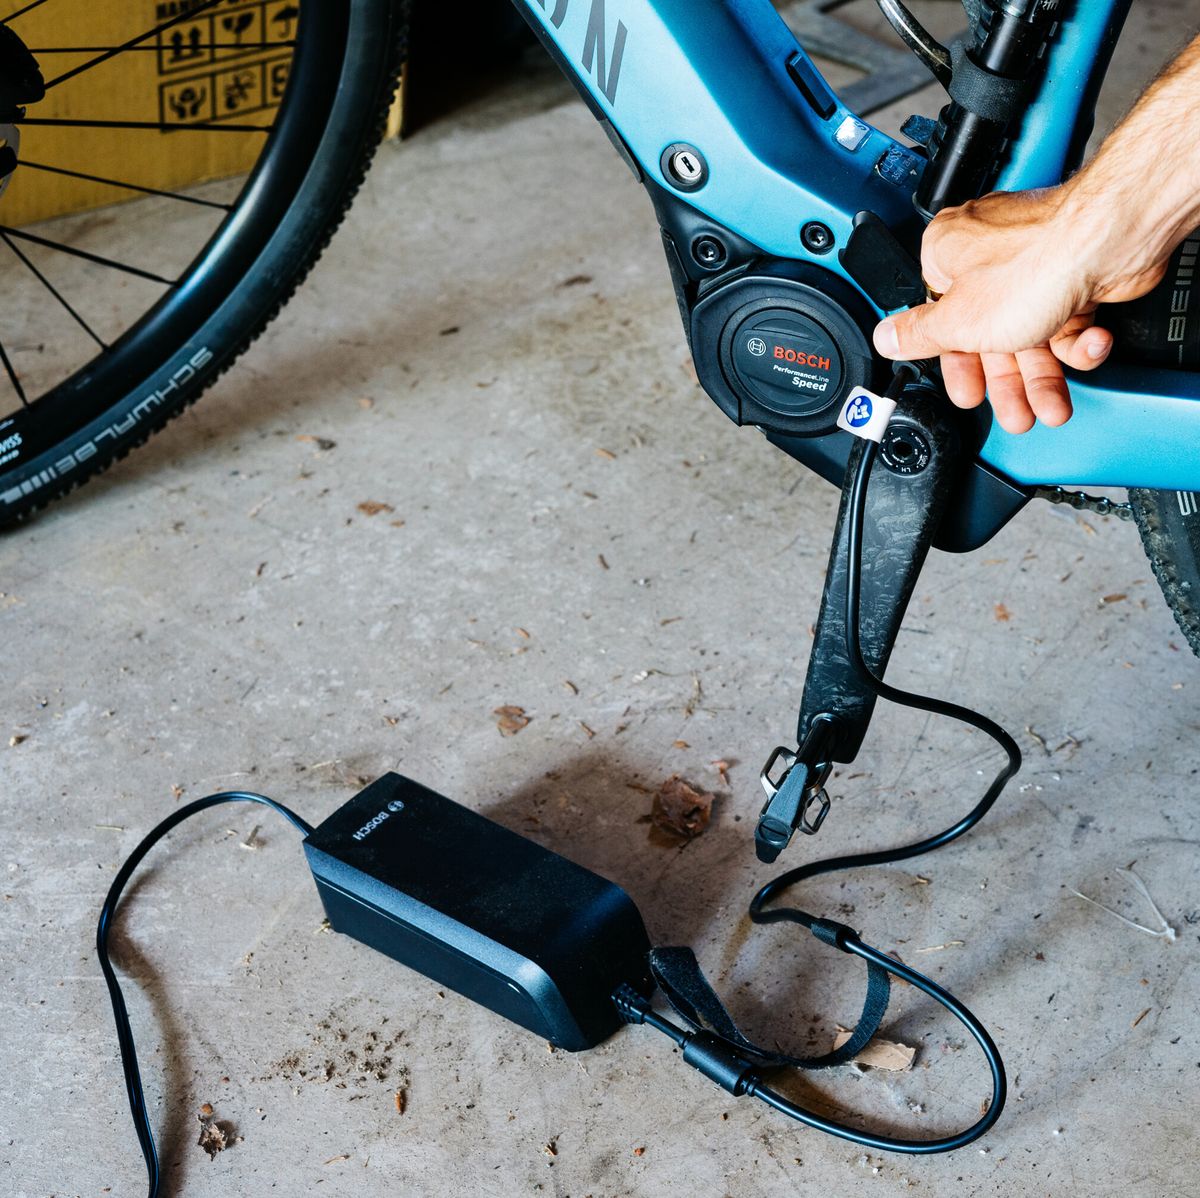 How To Charge An E-Bike: Guide To Safely Charging An Electric Bike